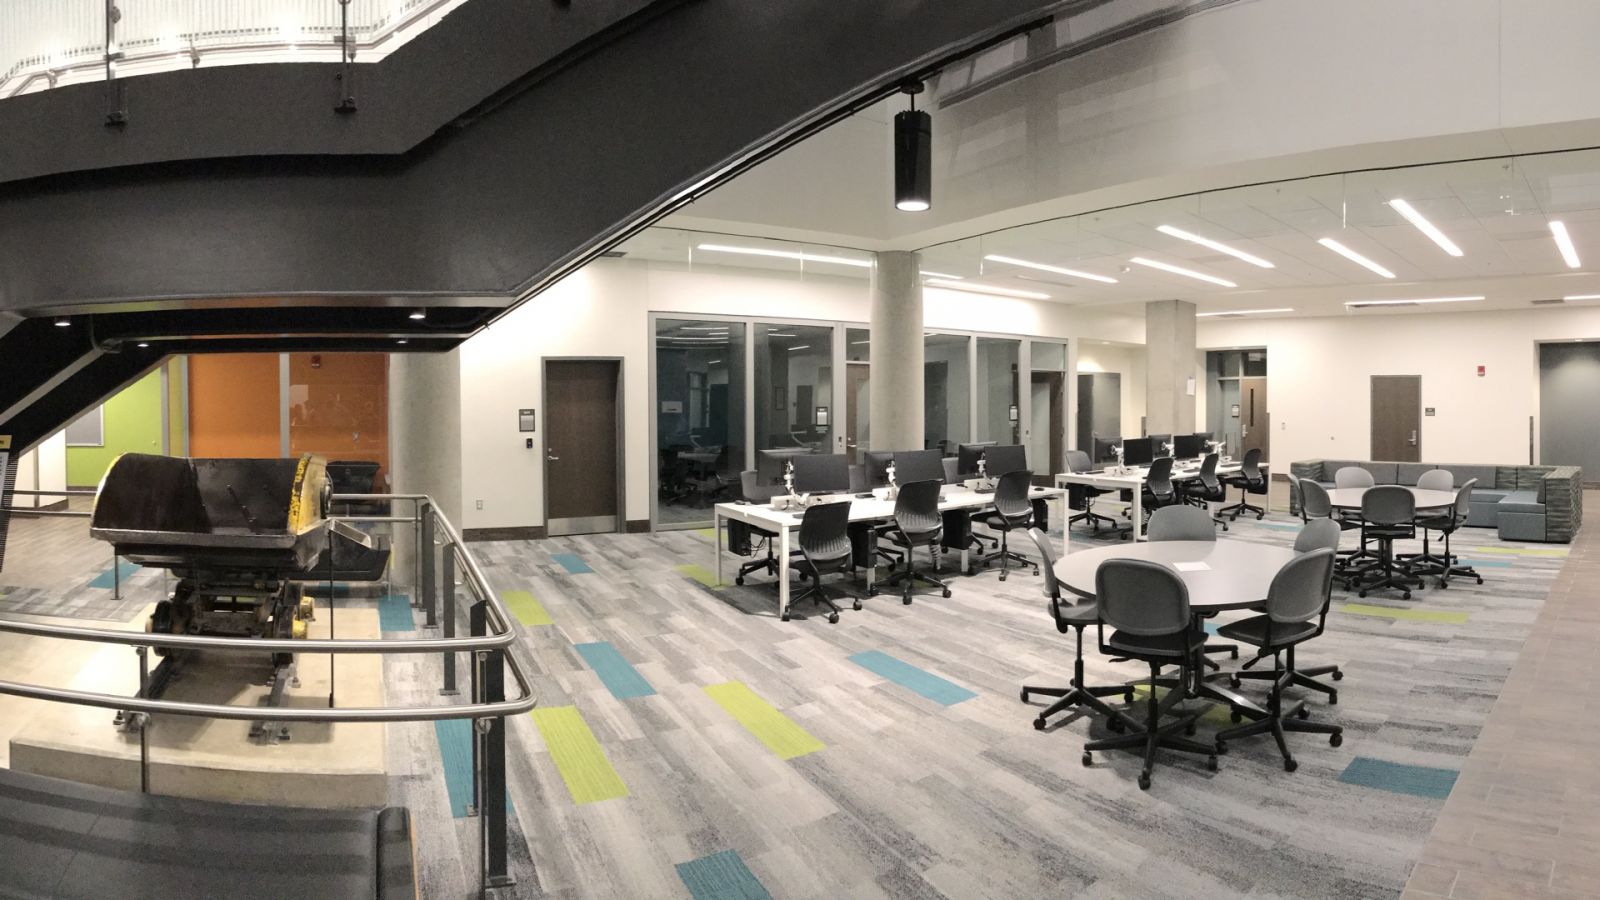 A study space in the Wilmeth Active Learning Center